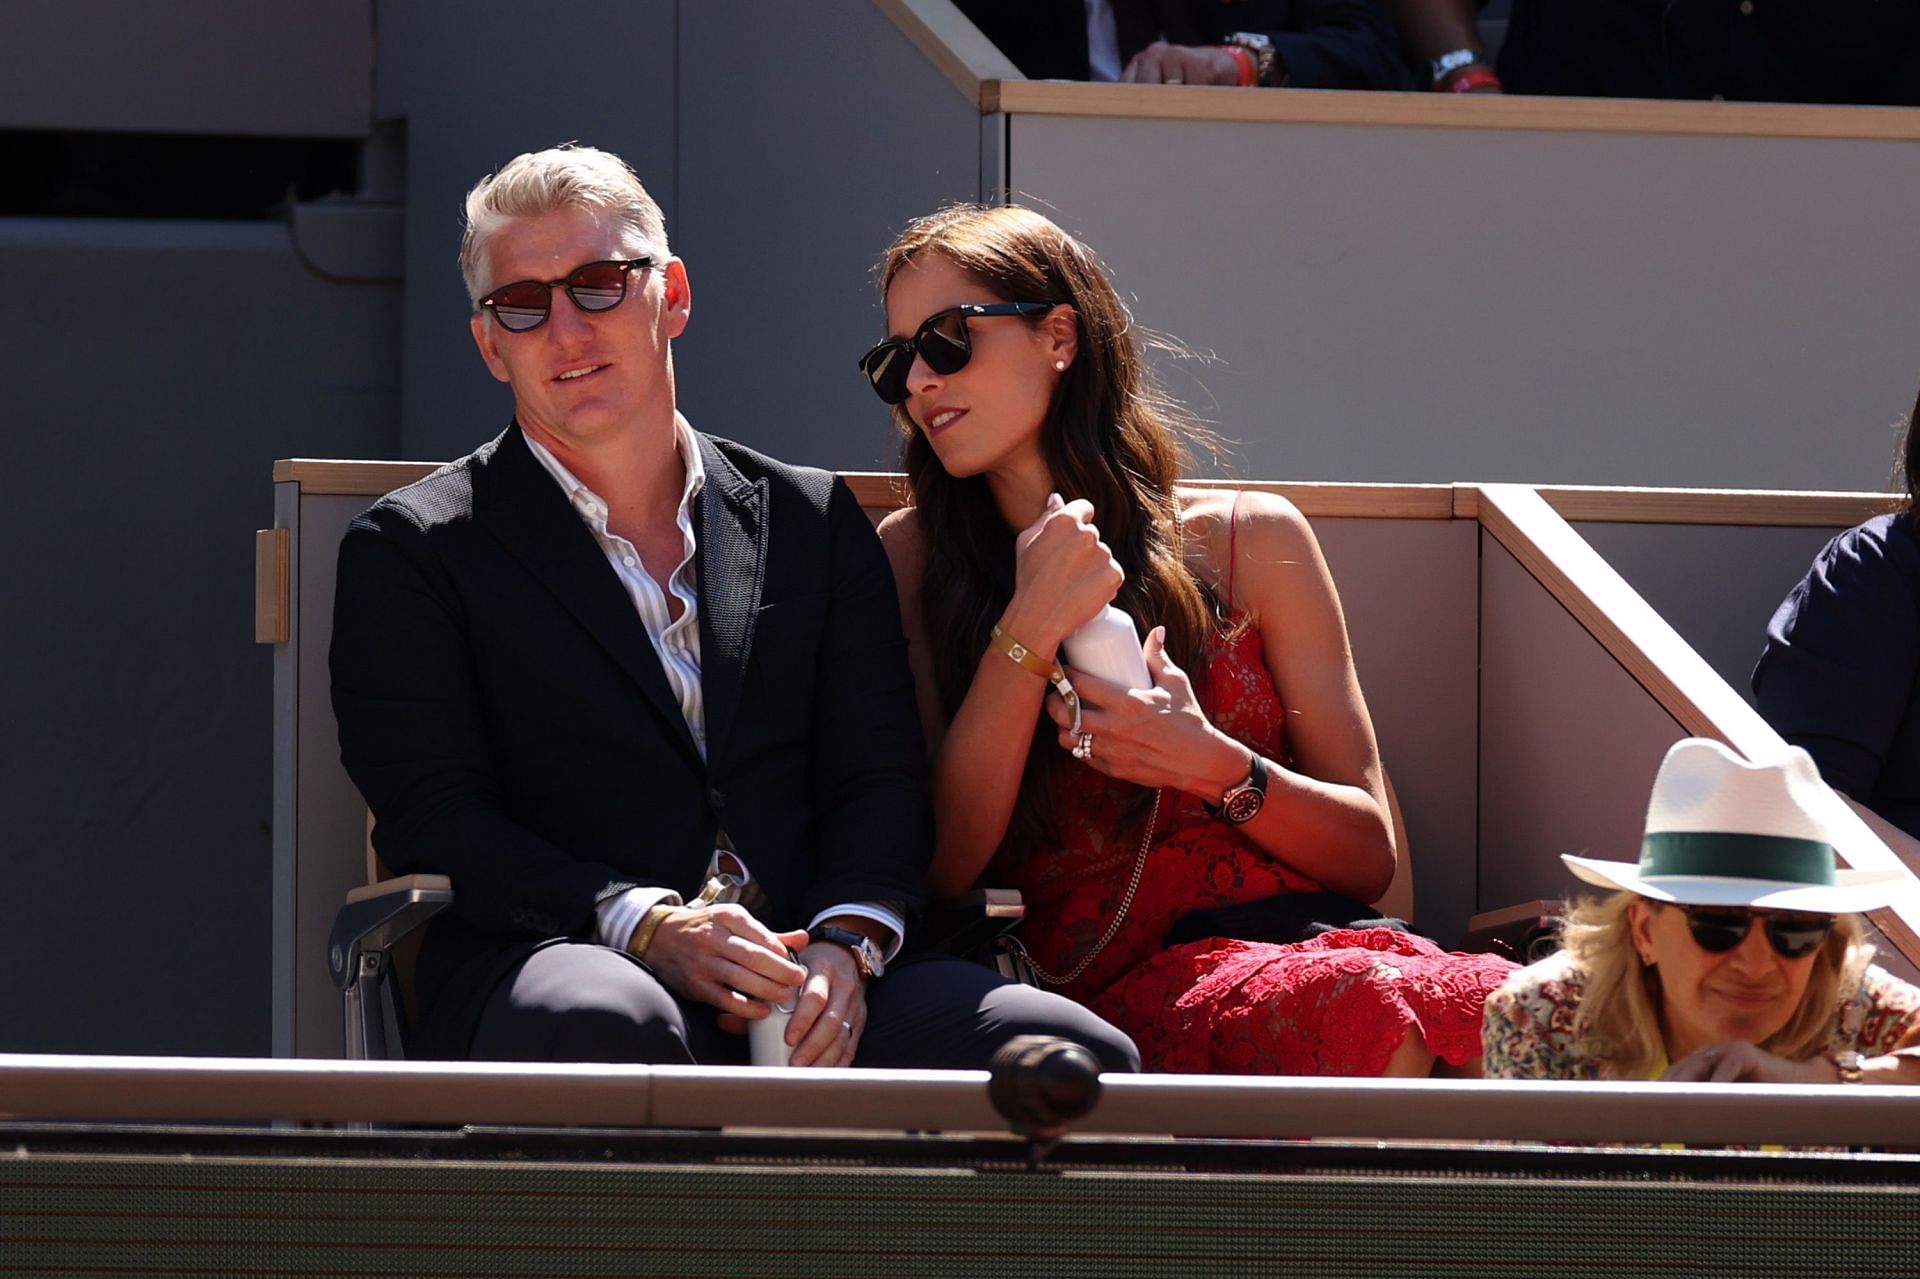 Ana Ivanovic with her husband Bastian Schweinsteiger at the French Open 2022.